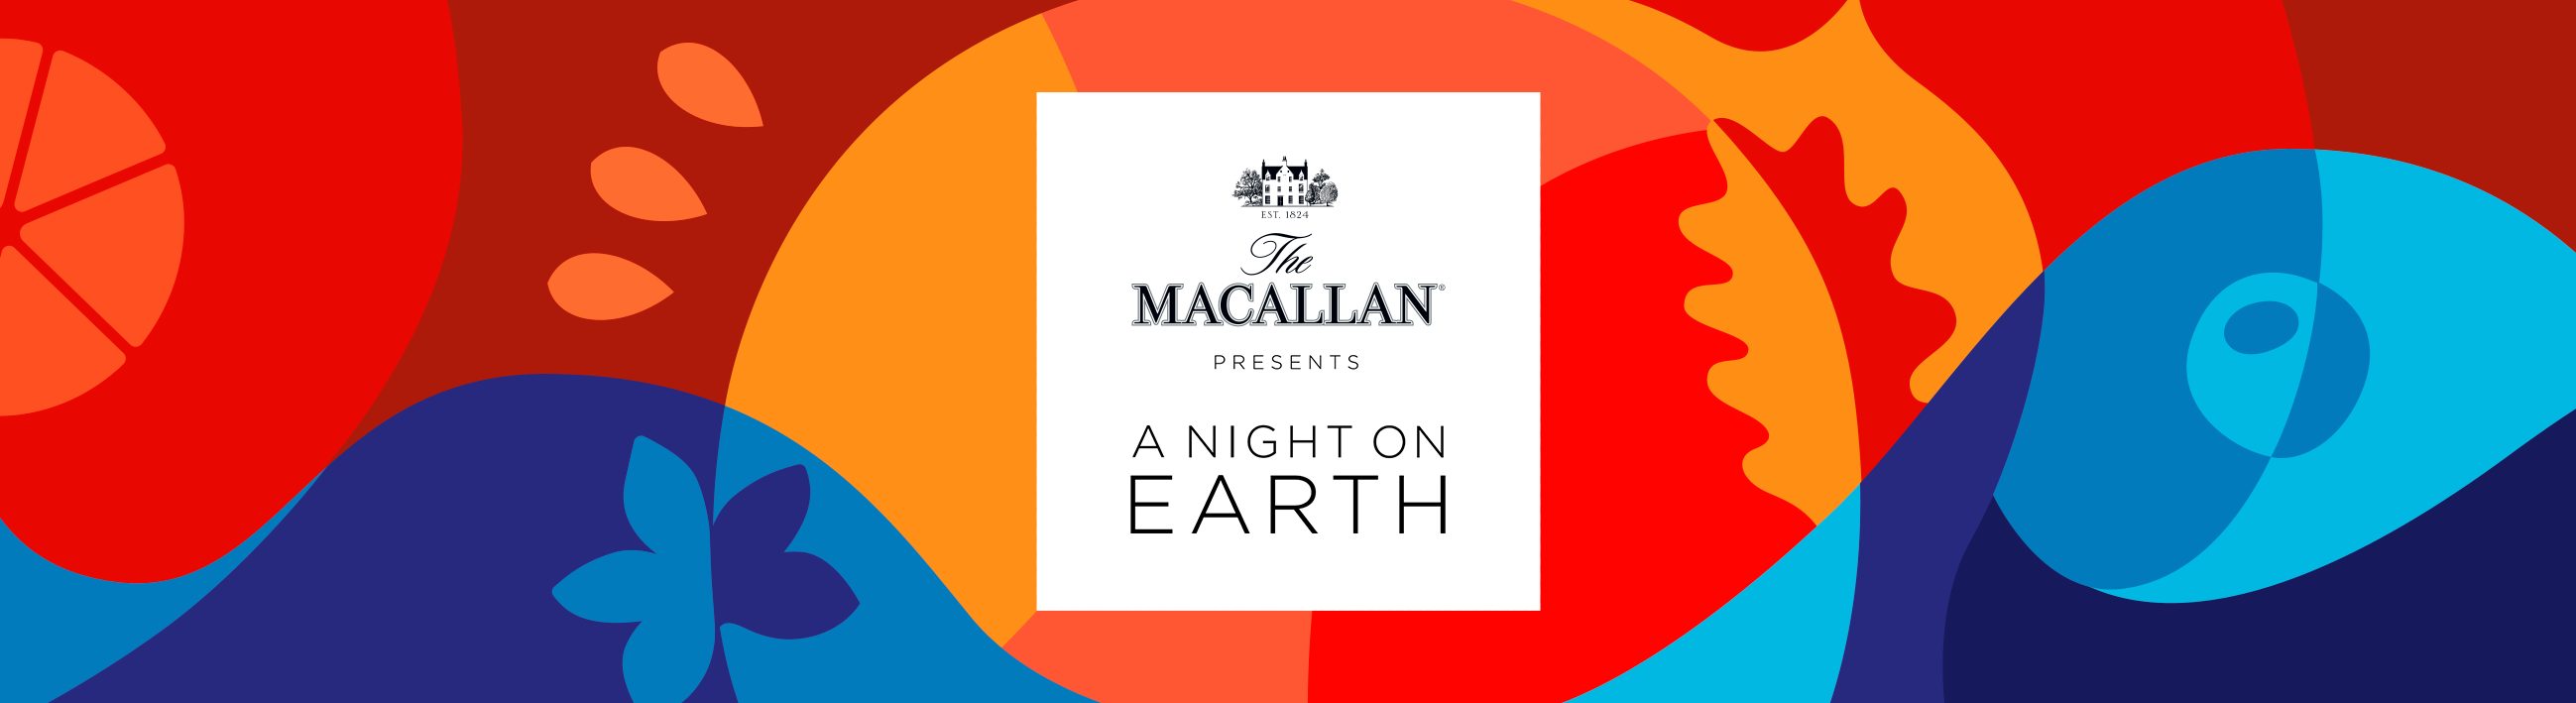 THE MACALLAN A NIGHT ON EARTH IN SCOTLAND Whiskey Blogger Stuart McNamaranbsp- The Macallan unveils A Night On Earth In Scotland single malt whisky which reveals the story of Scotlands worldfamous Hogmanay festivities - International Whiskey Reviews by Irish Whiskey Blogger Stuart McNamara